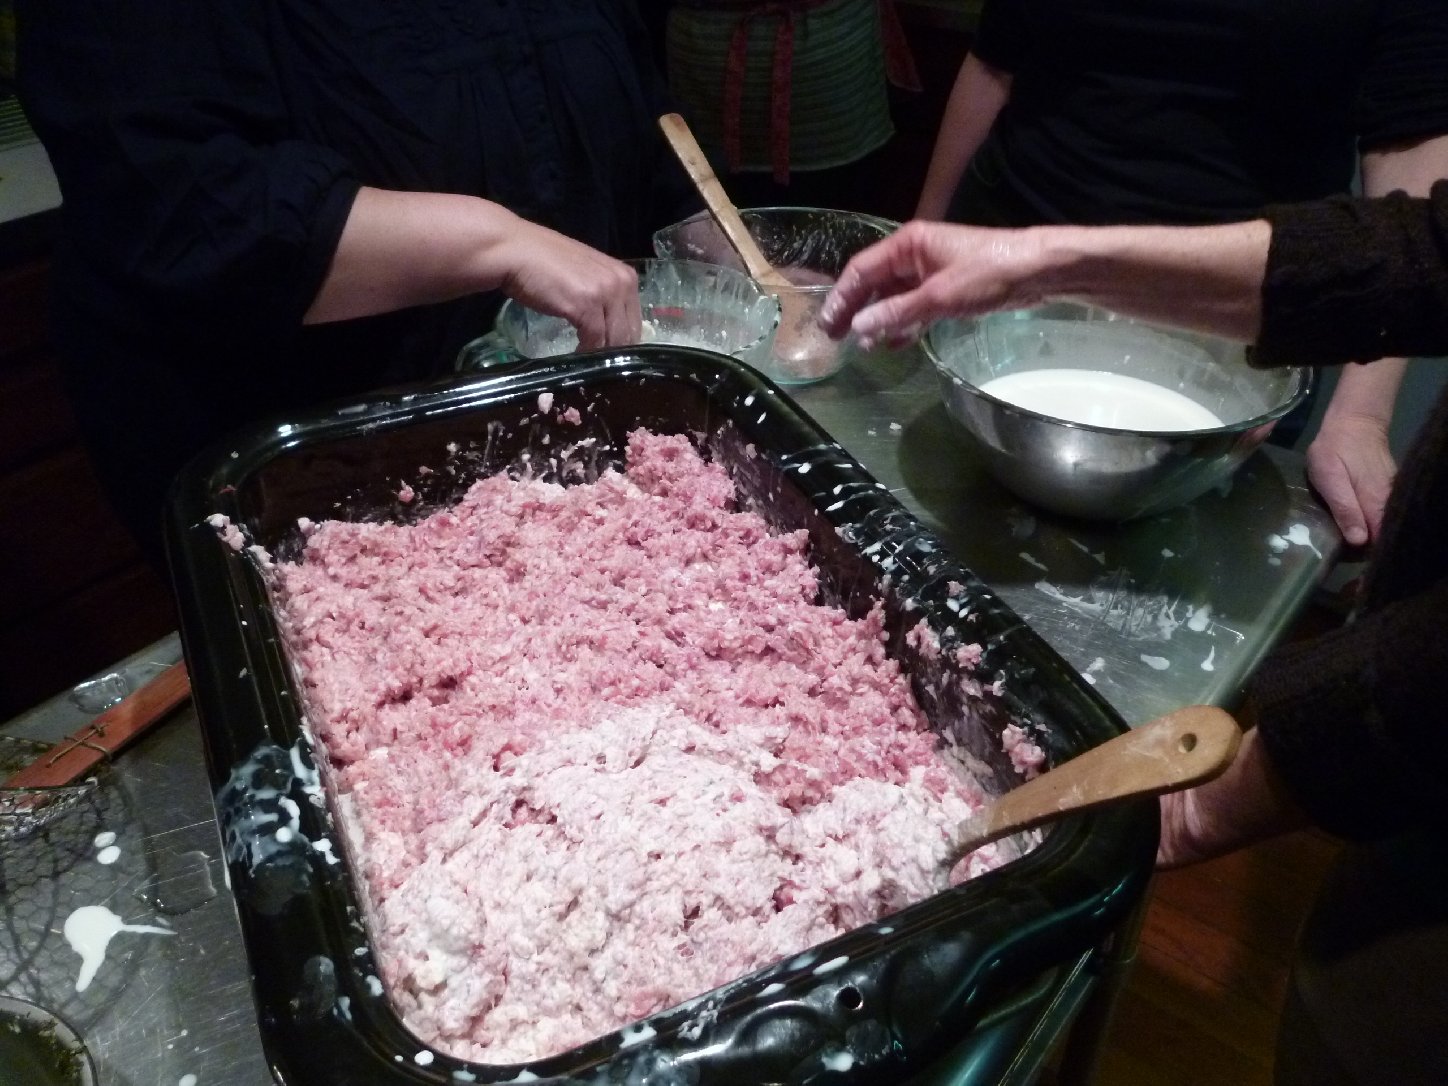 Mixing the sausage with cream and bread crumbs. Photo: Stephanie Rosenbaum